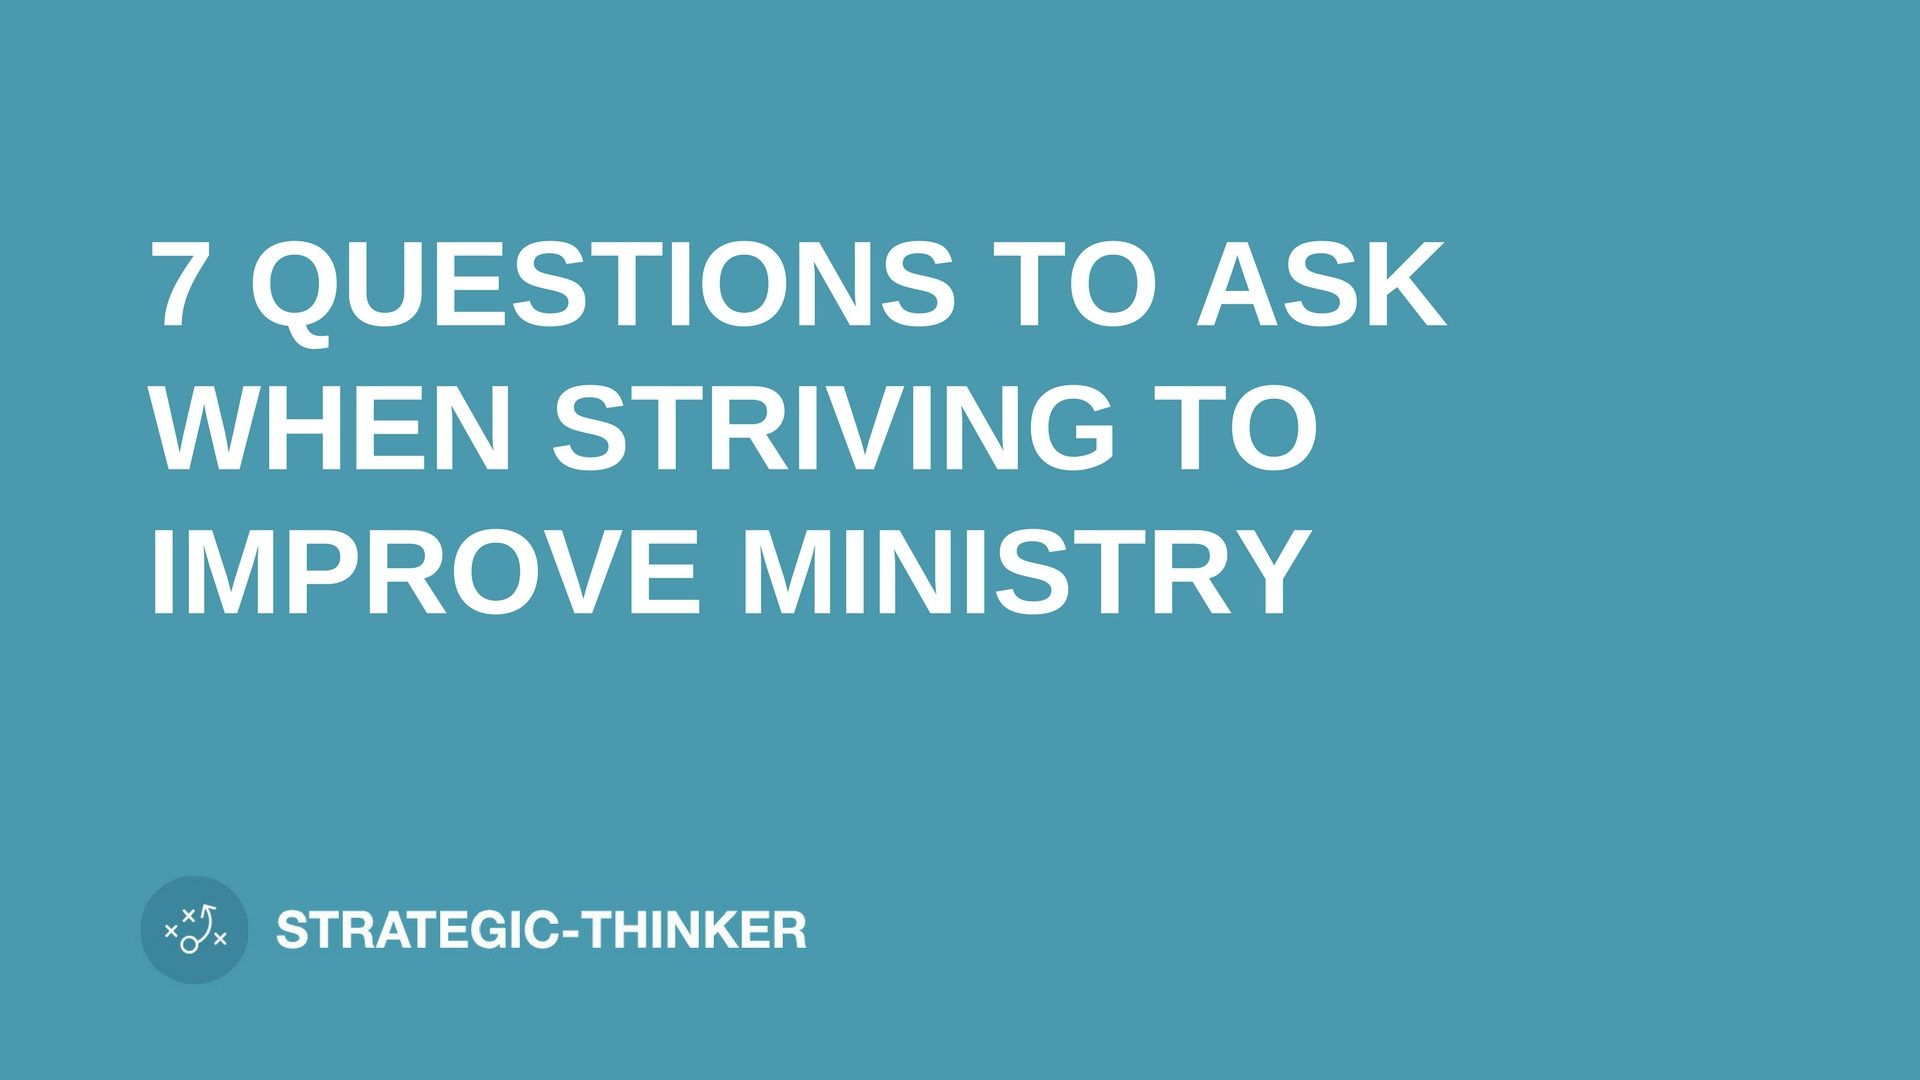 text "7 QUESTIONS TO ASK WHEN STRIVING TO IMPROVE MINISTRY" on blue background leaders.church